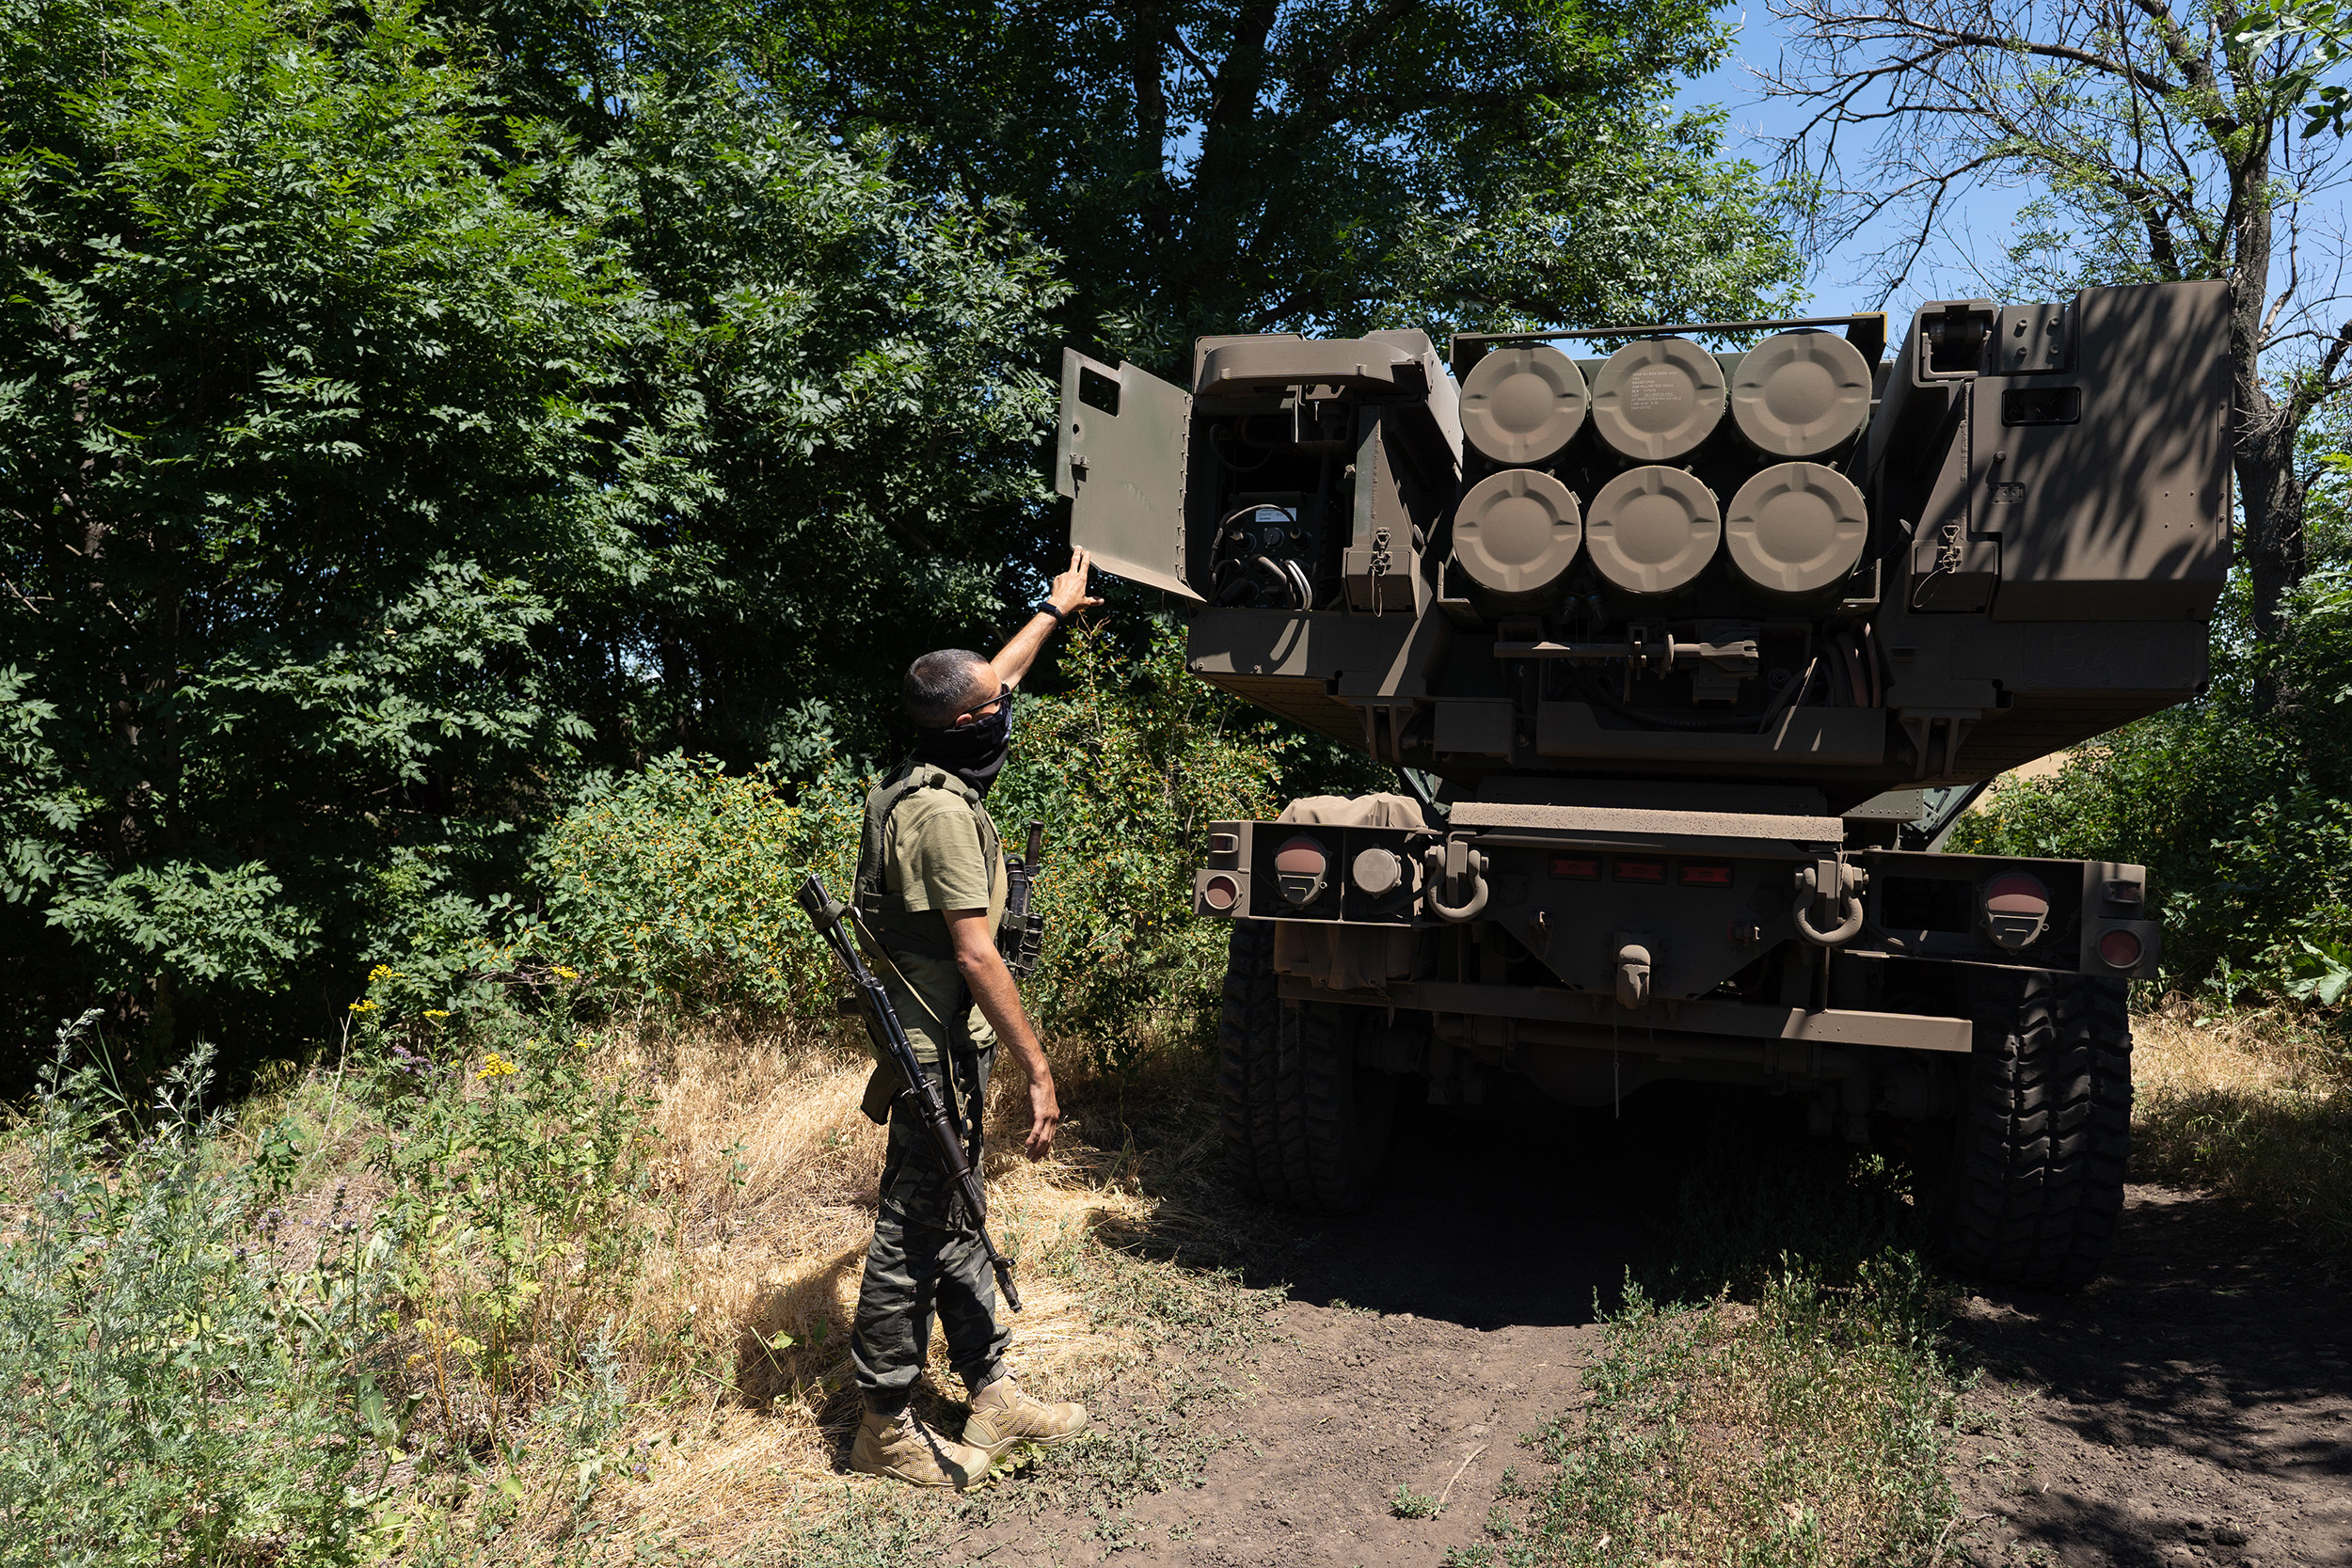 The commander of the unit checks the rockets on a HIMARS vehicle in Eastern Ukraine on July 1.